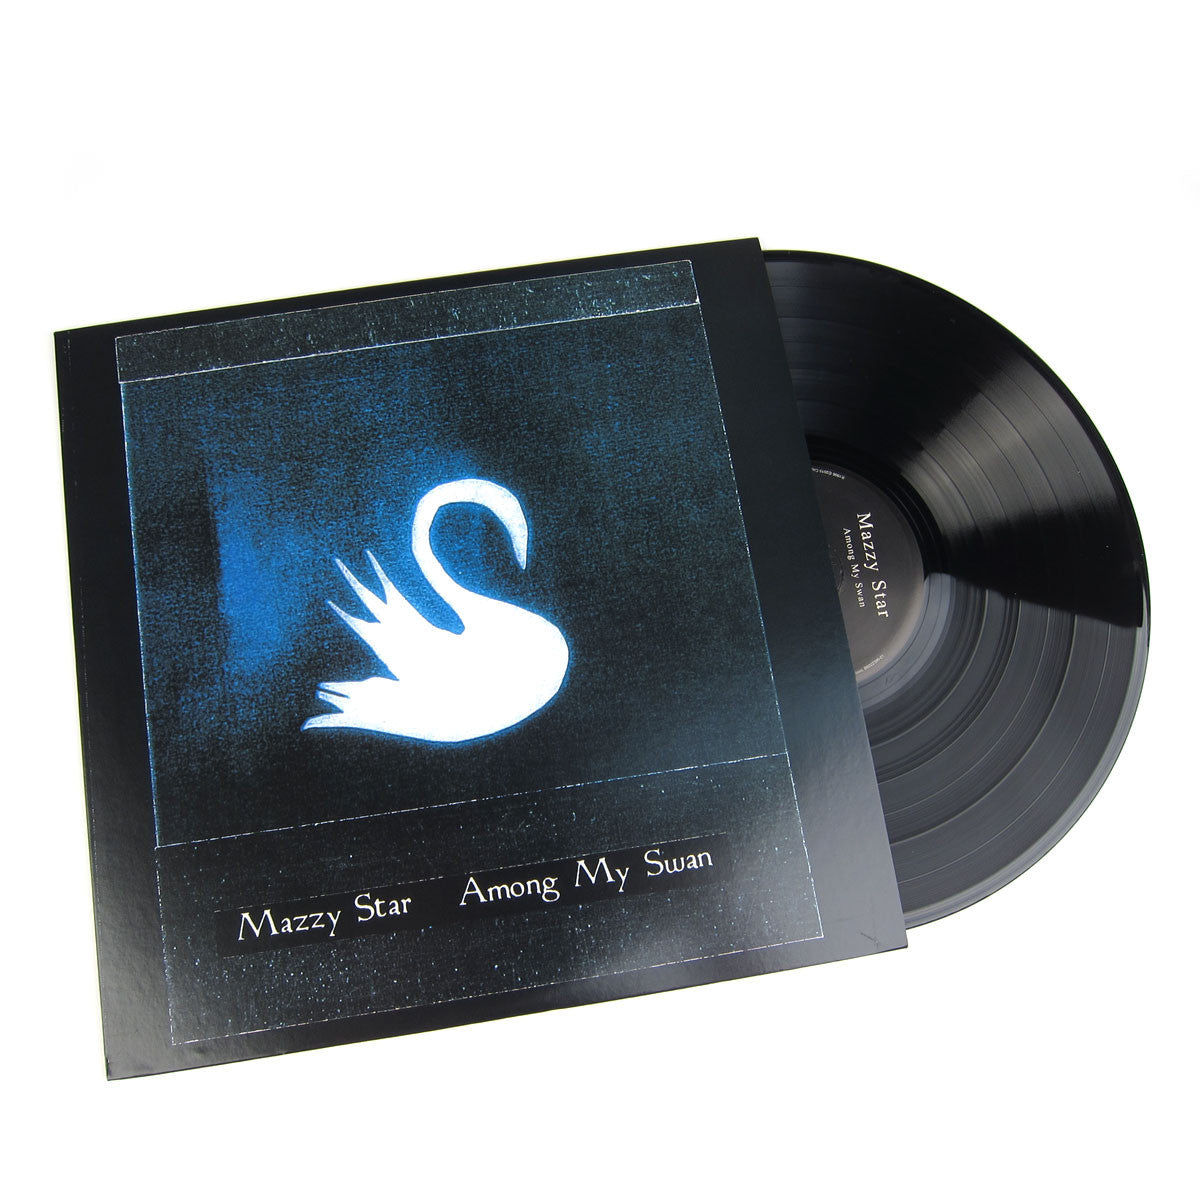 Image result for mazzy star among my swan vinyl